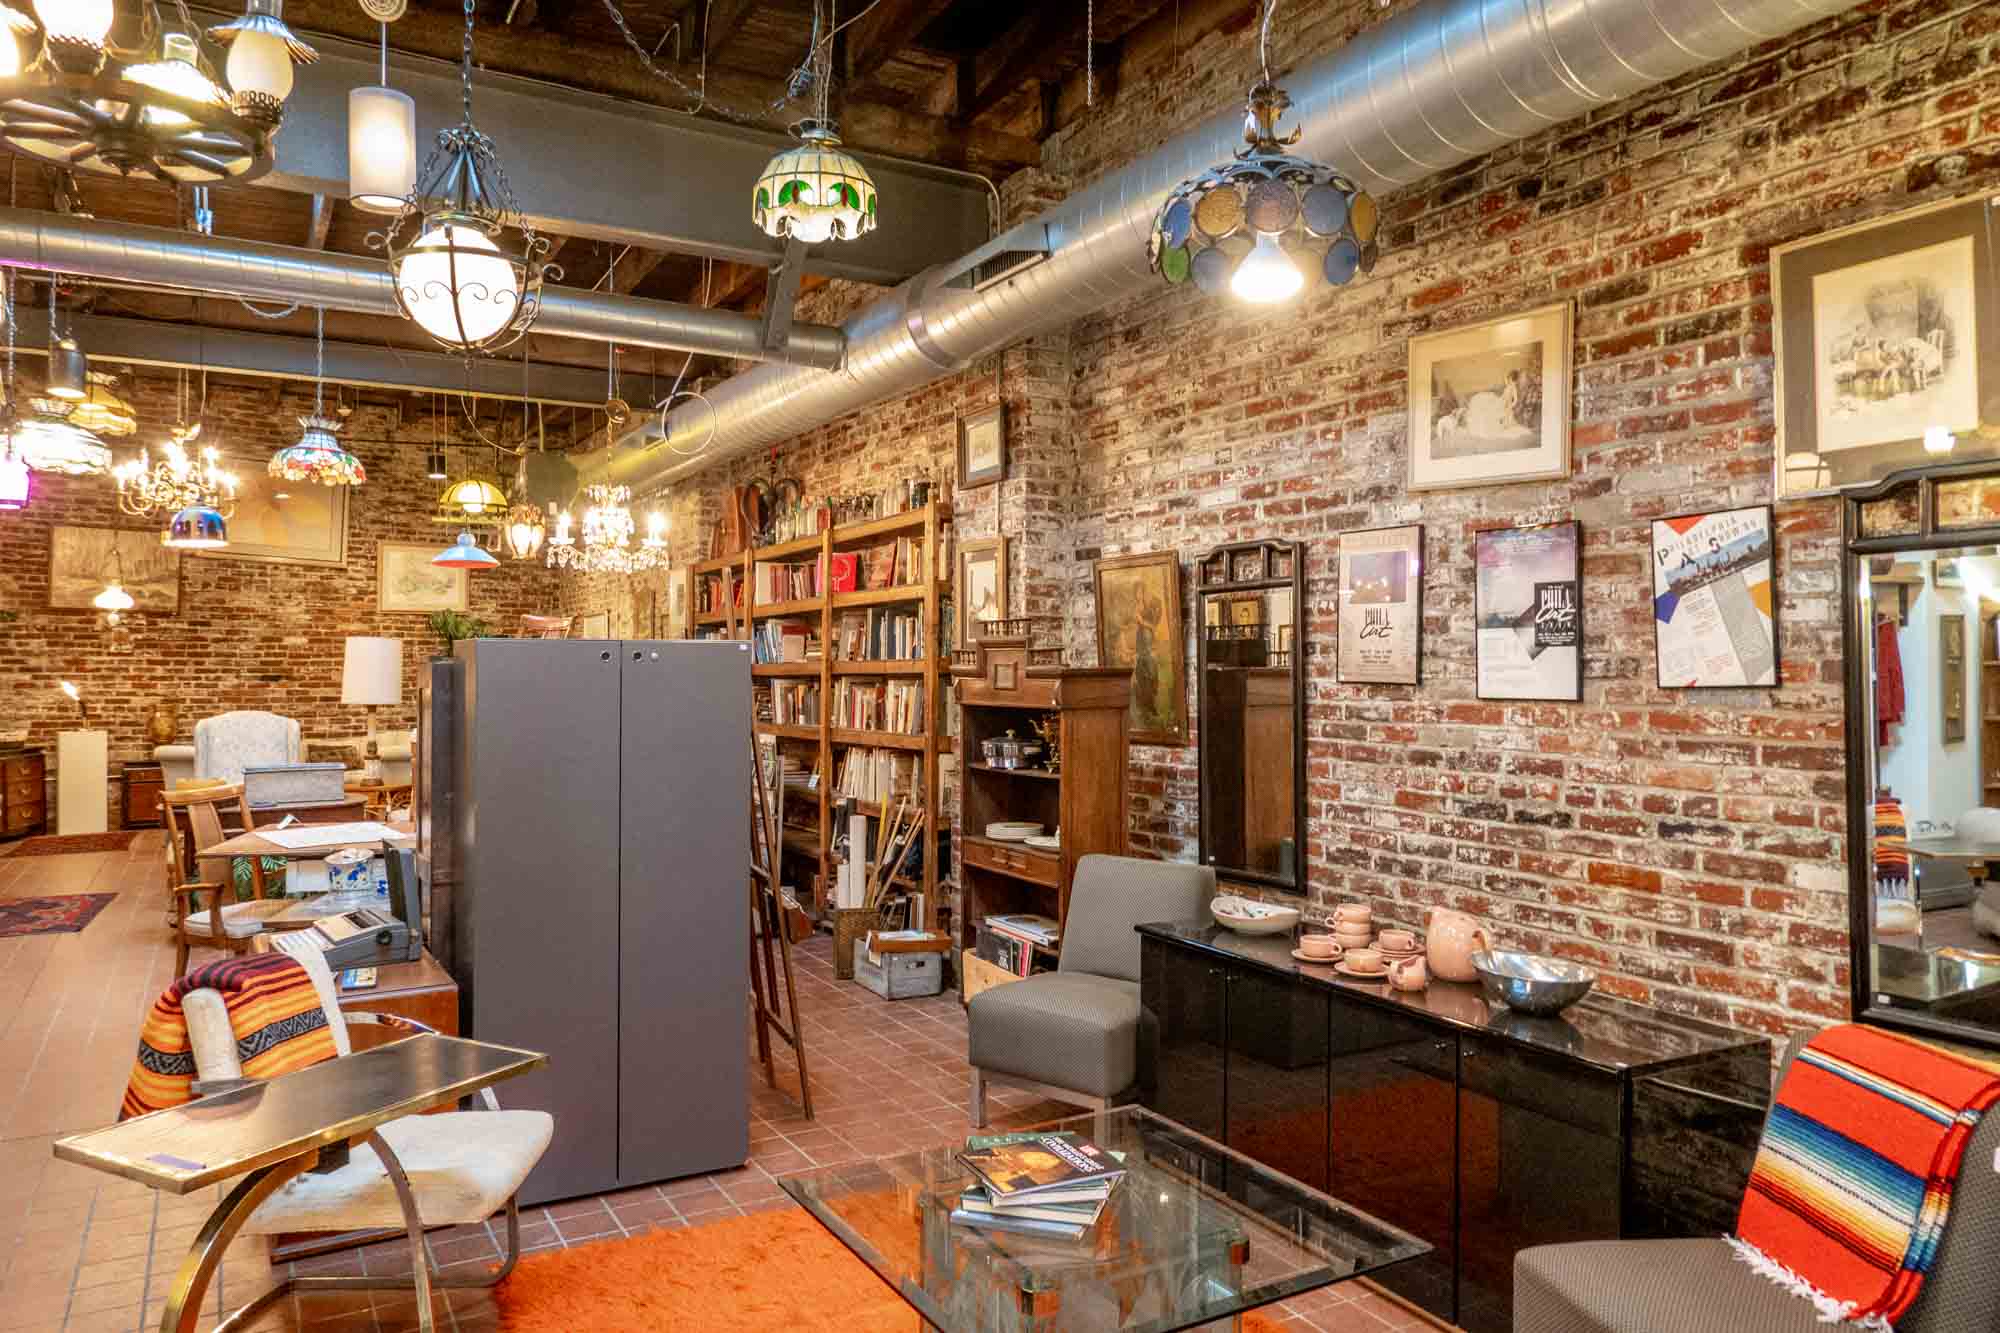 Furniture for sale in a thrift shop room with exposed brick walls